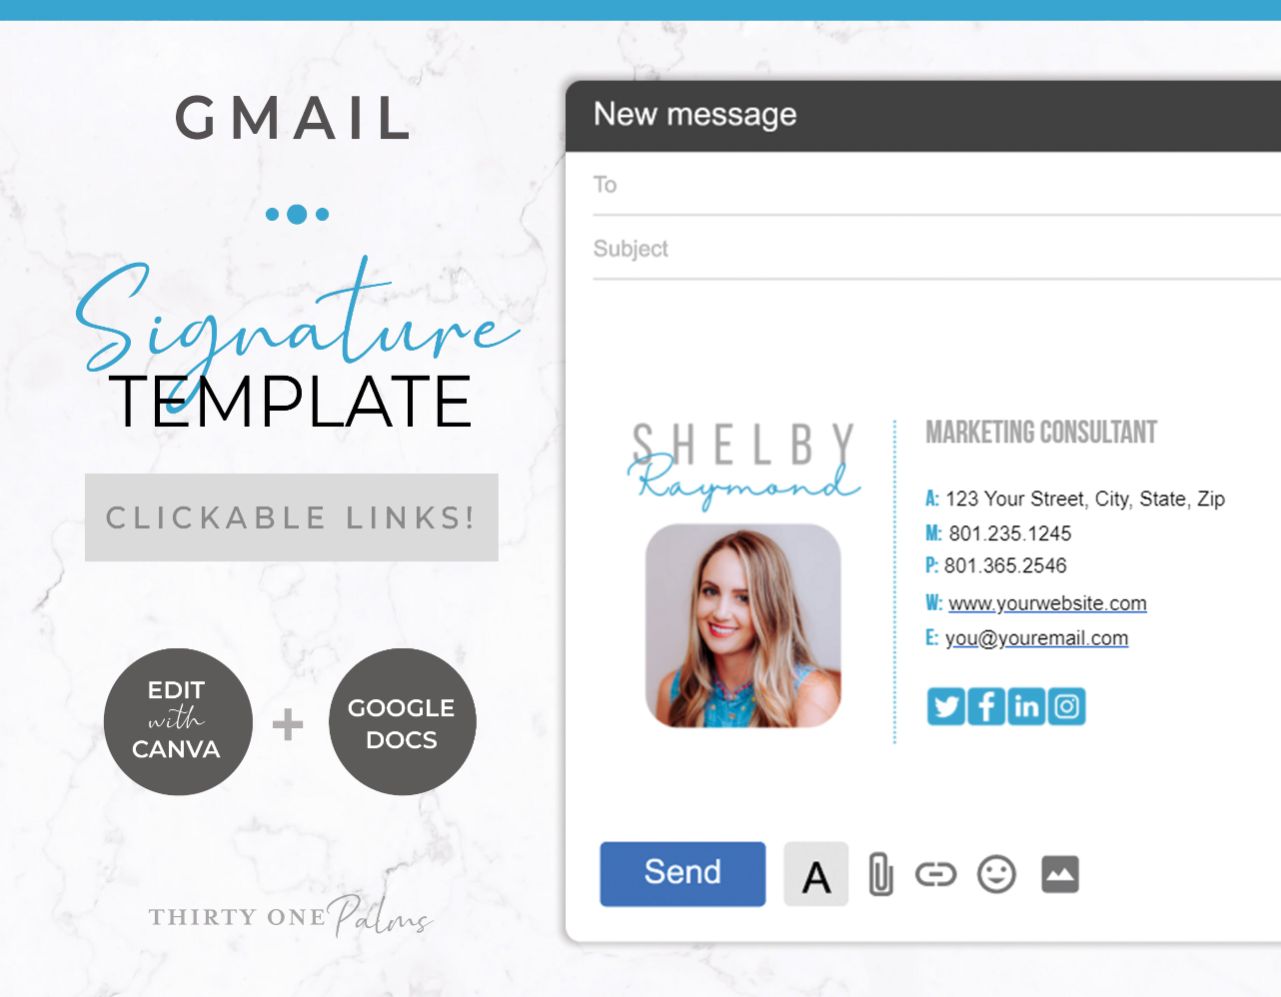 Email Signature Template for Gmail – Blue & Black